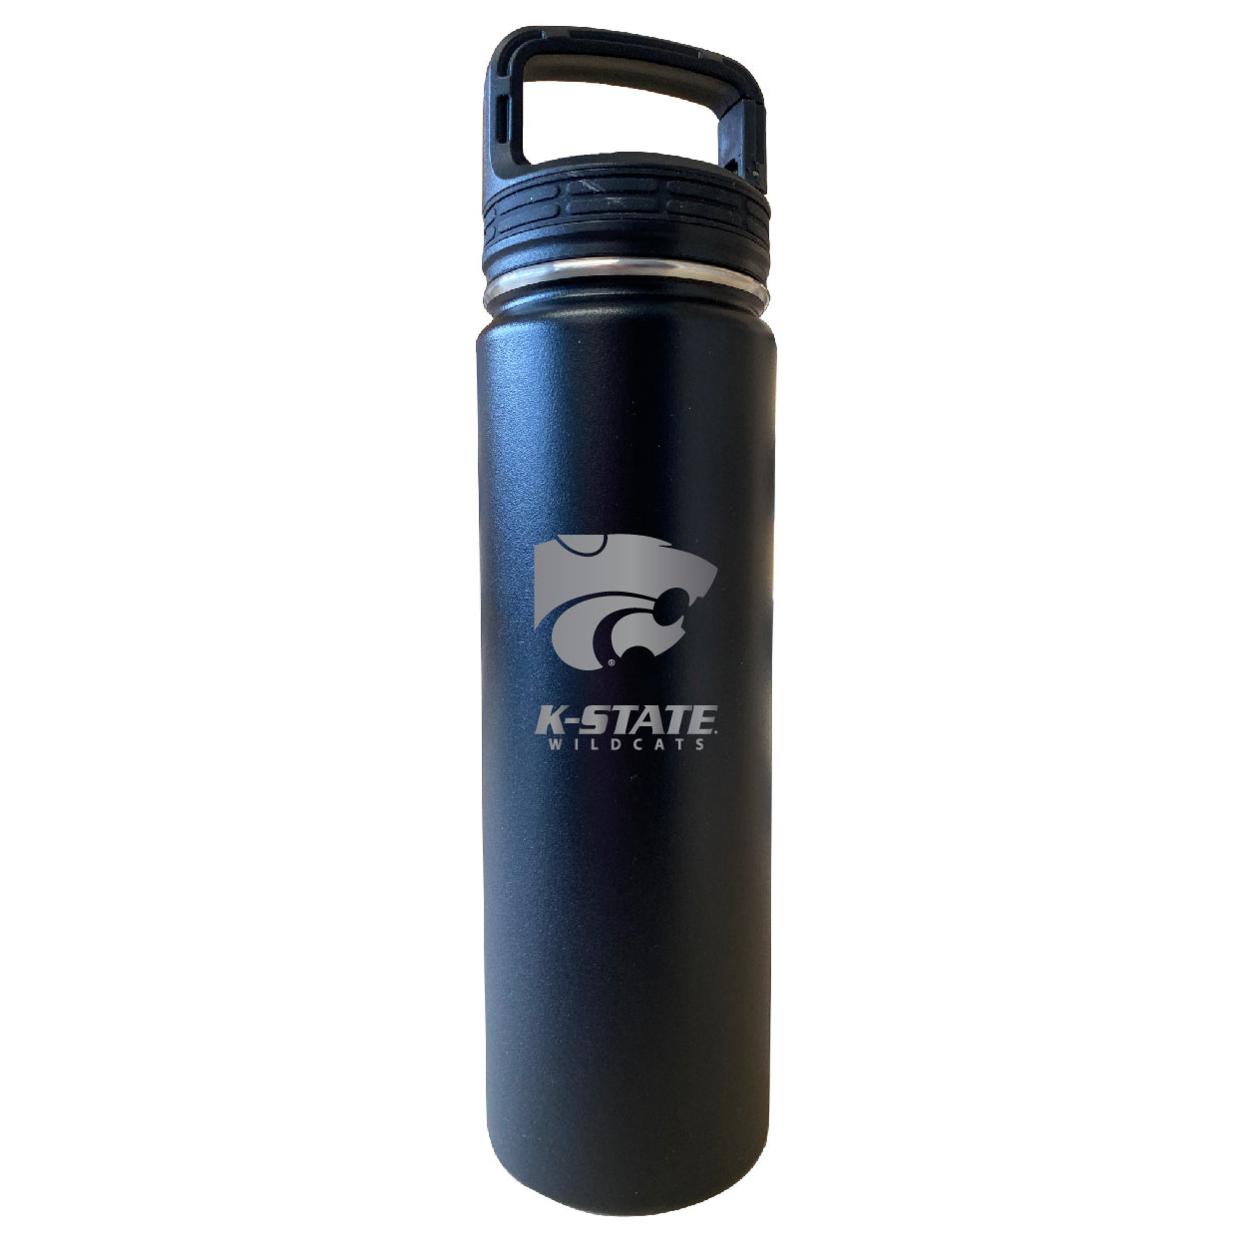 Kansas State Wildcats 32 Oz Engraved Insulated Double Wall Stainless Steel Water Bottle Tumbler (Black)